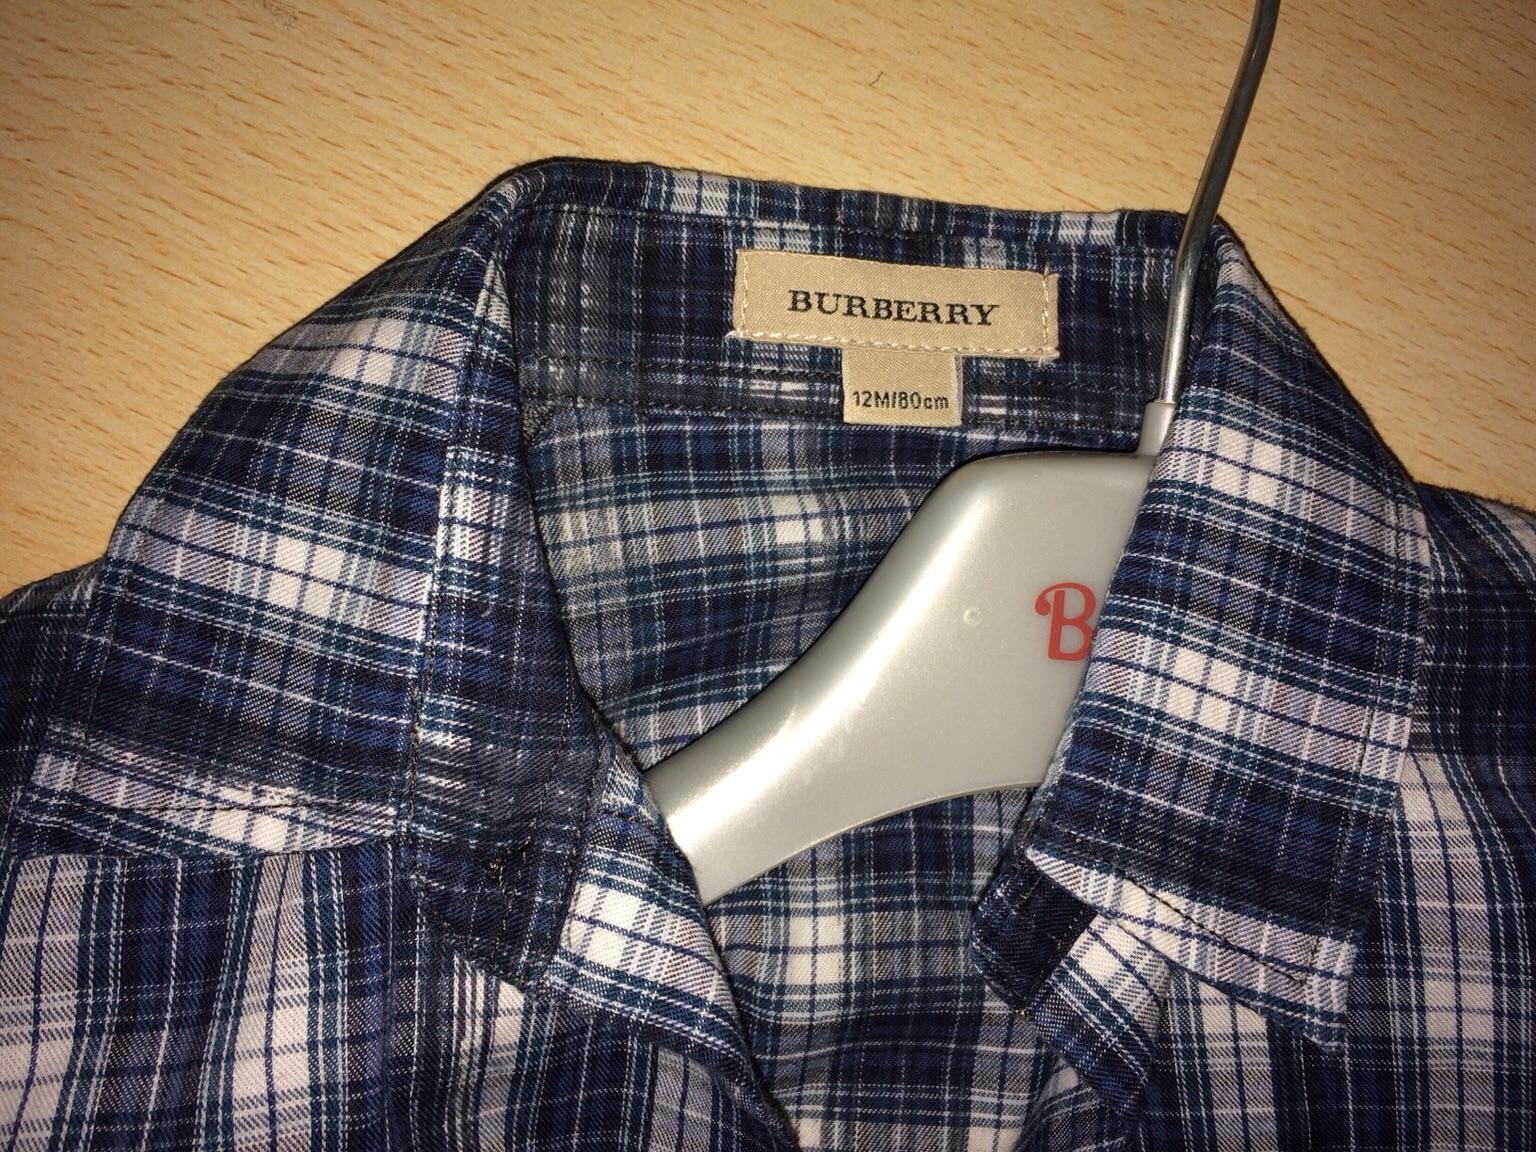 Camicia BURBERRY 12M/80 cm in 20077 Melegnano for €19.00 for sale | Shpock